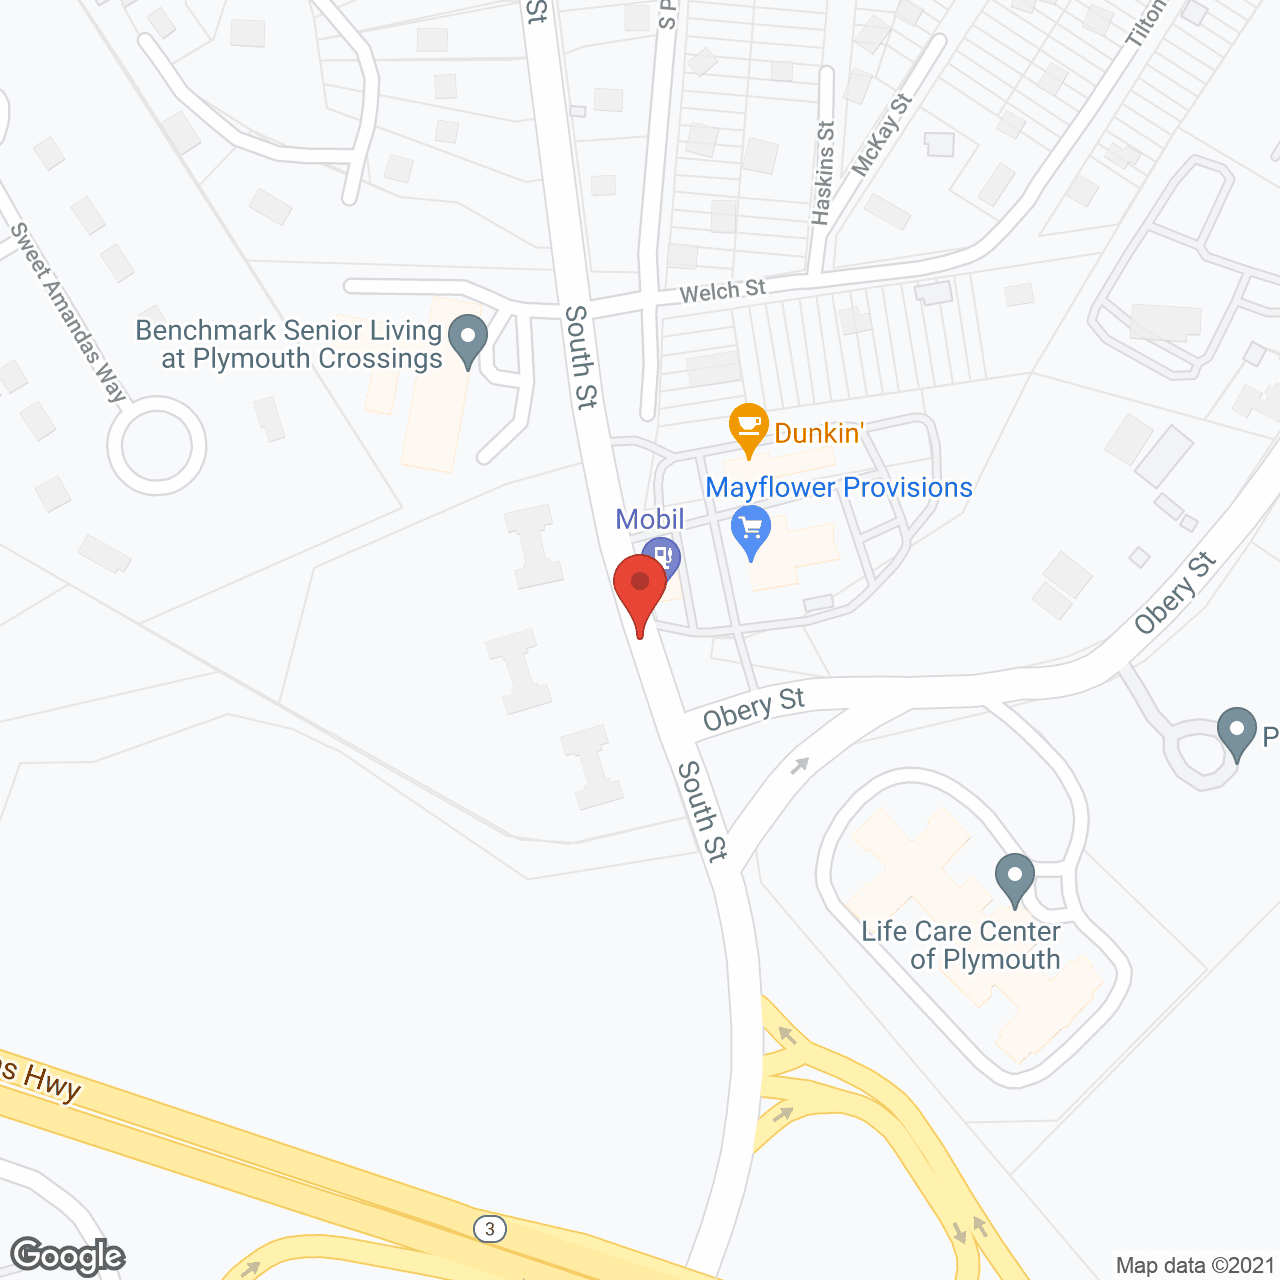 Benchmark Senior Living at Plymouth Crossings in google map